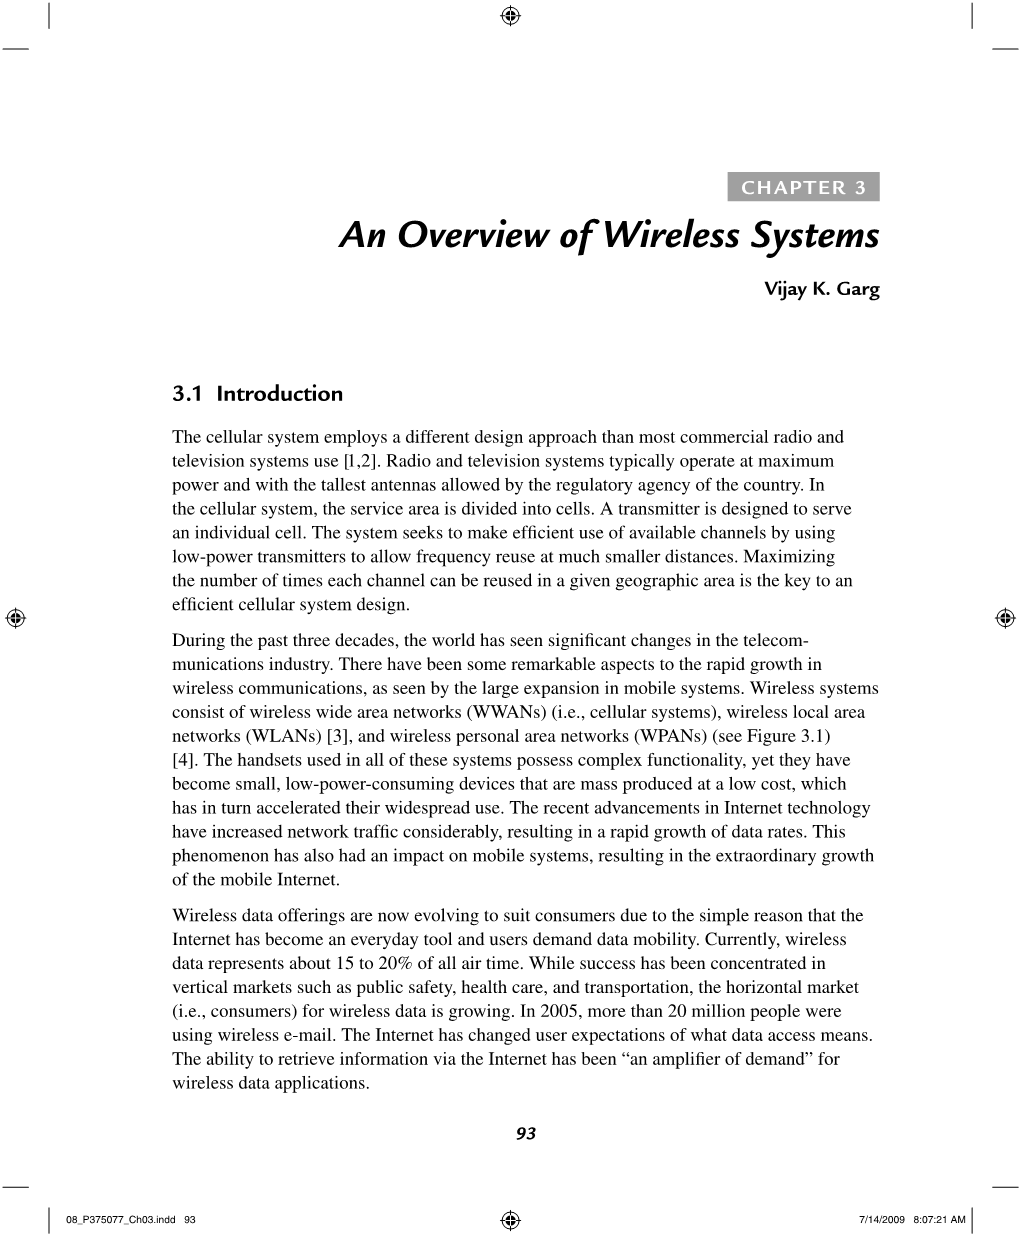 An Overview of Wireless Systems